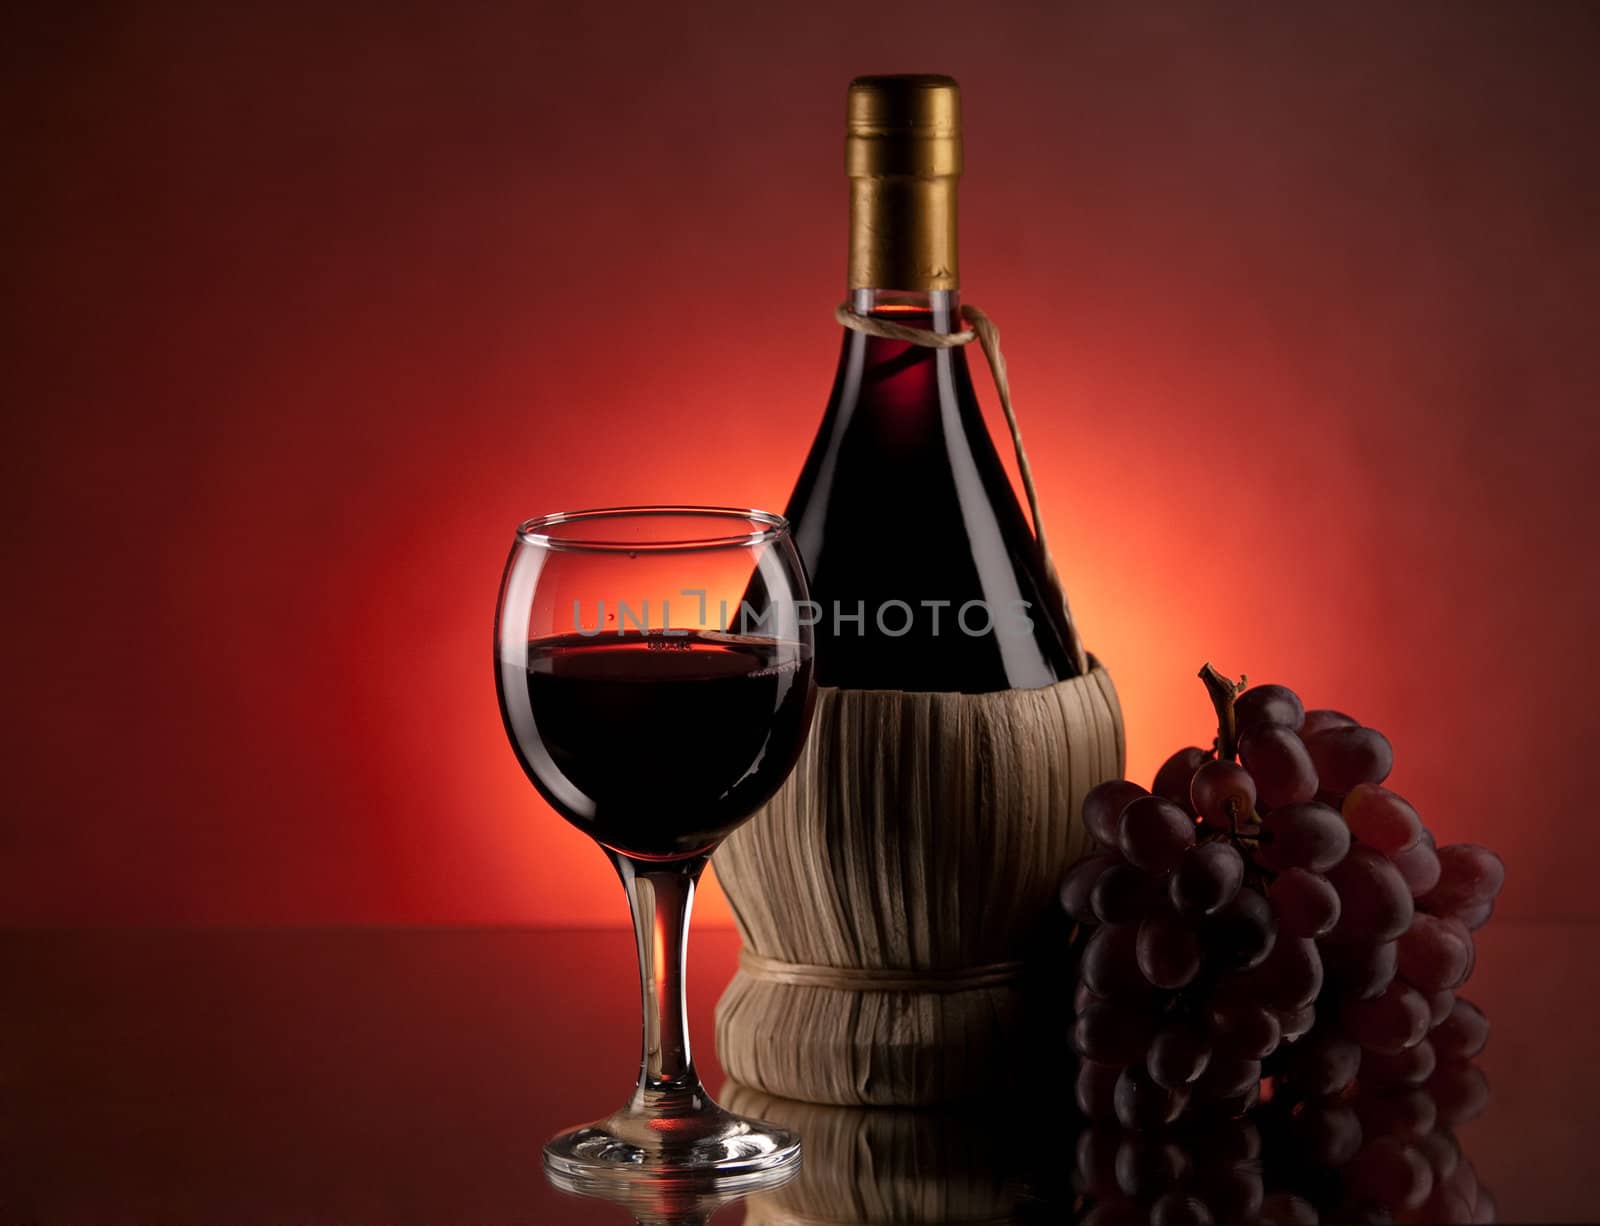 Red wine, glass and bottle